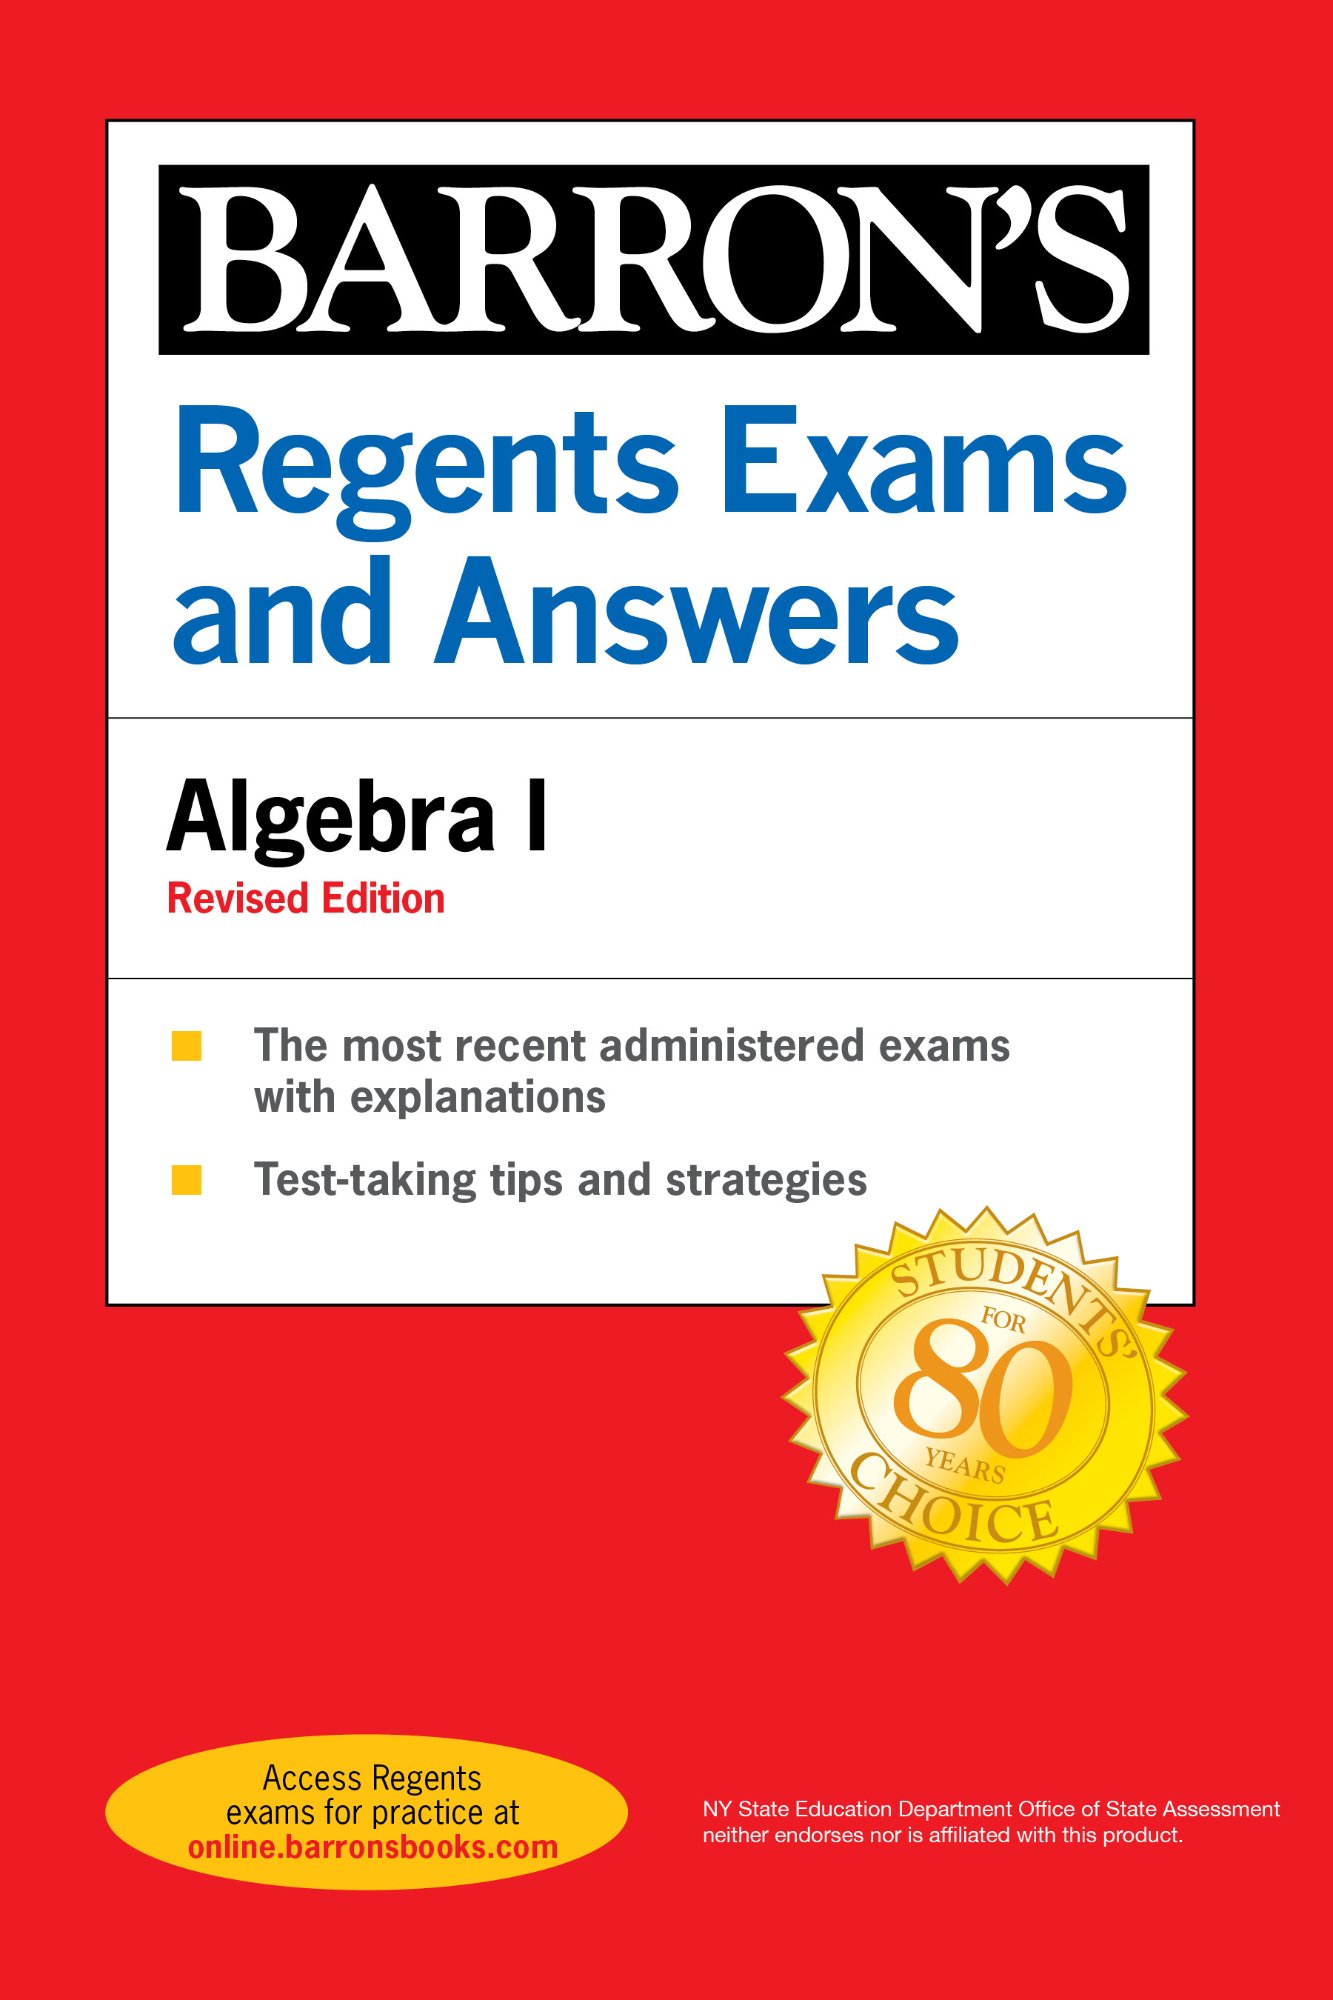 download-regents-exams-and-answers-algebra-i-barron-s-regents-ny-revised-edition-softarchive